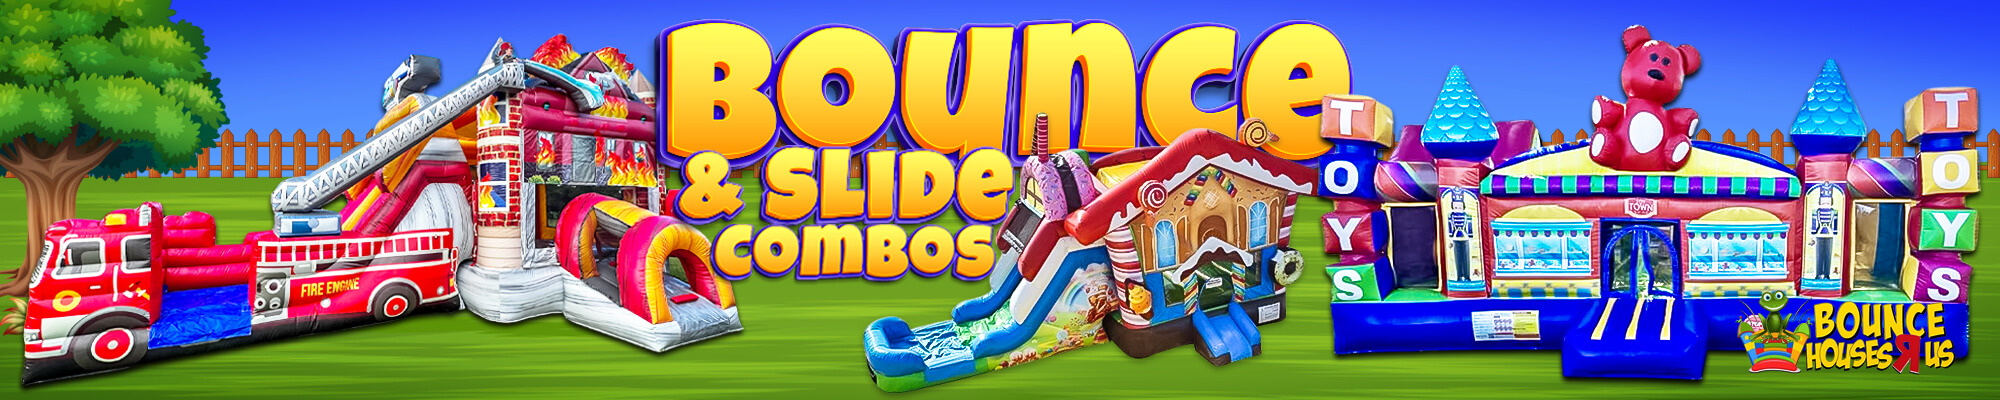 Chicago Bounce House with Slide rentals